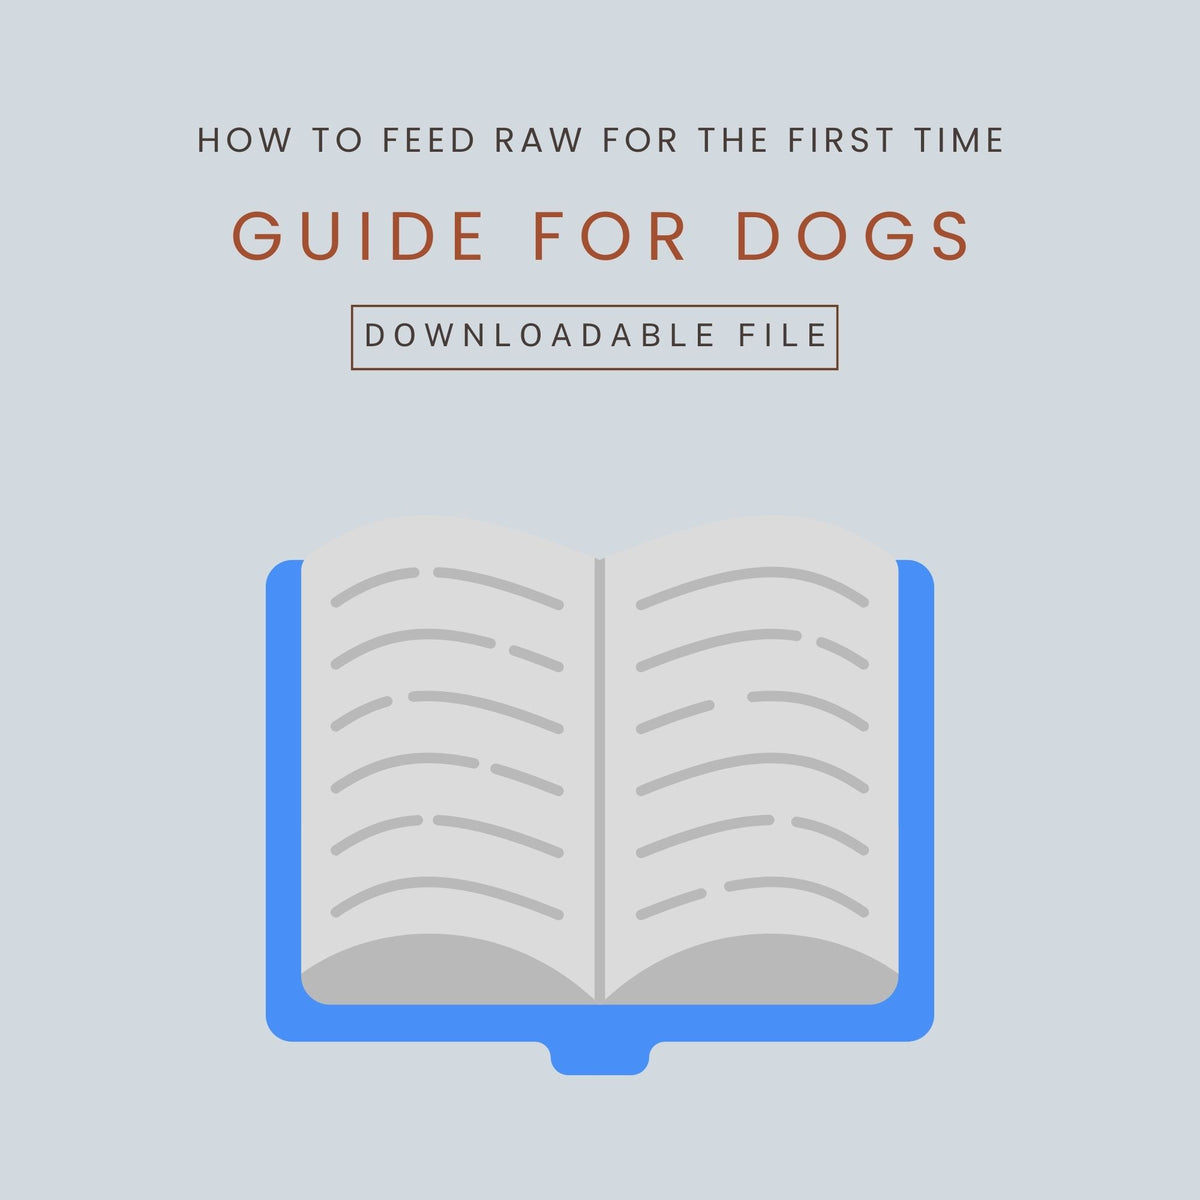 How To Feed Raw For The First Time Guide For Dogs